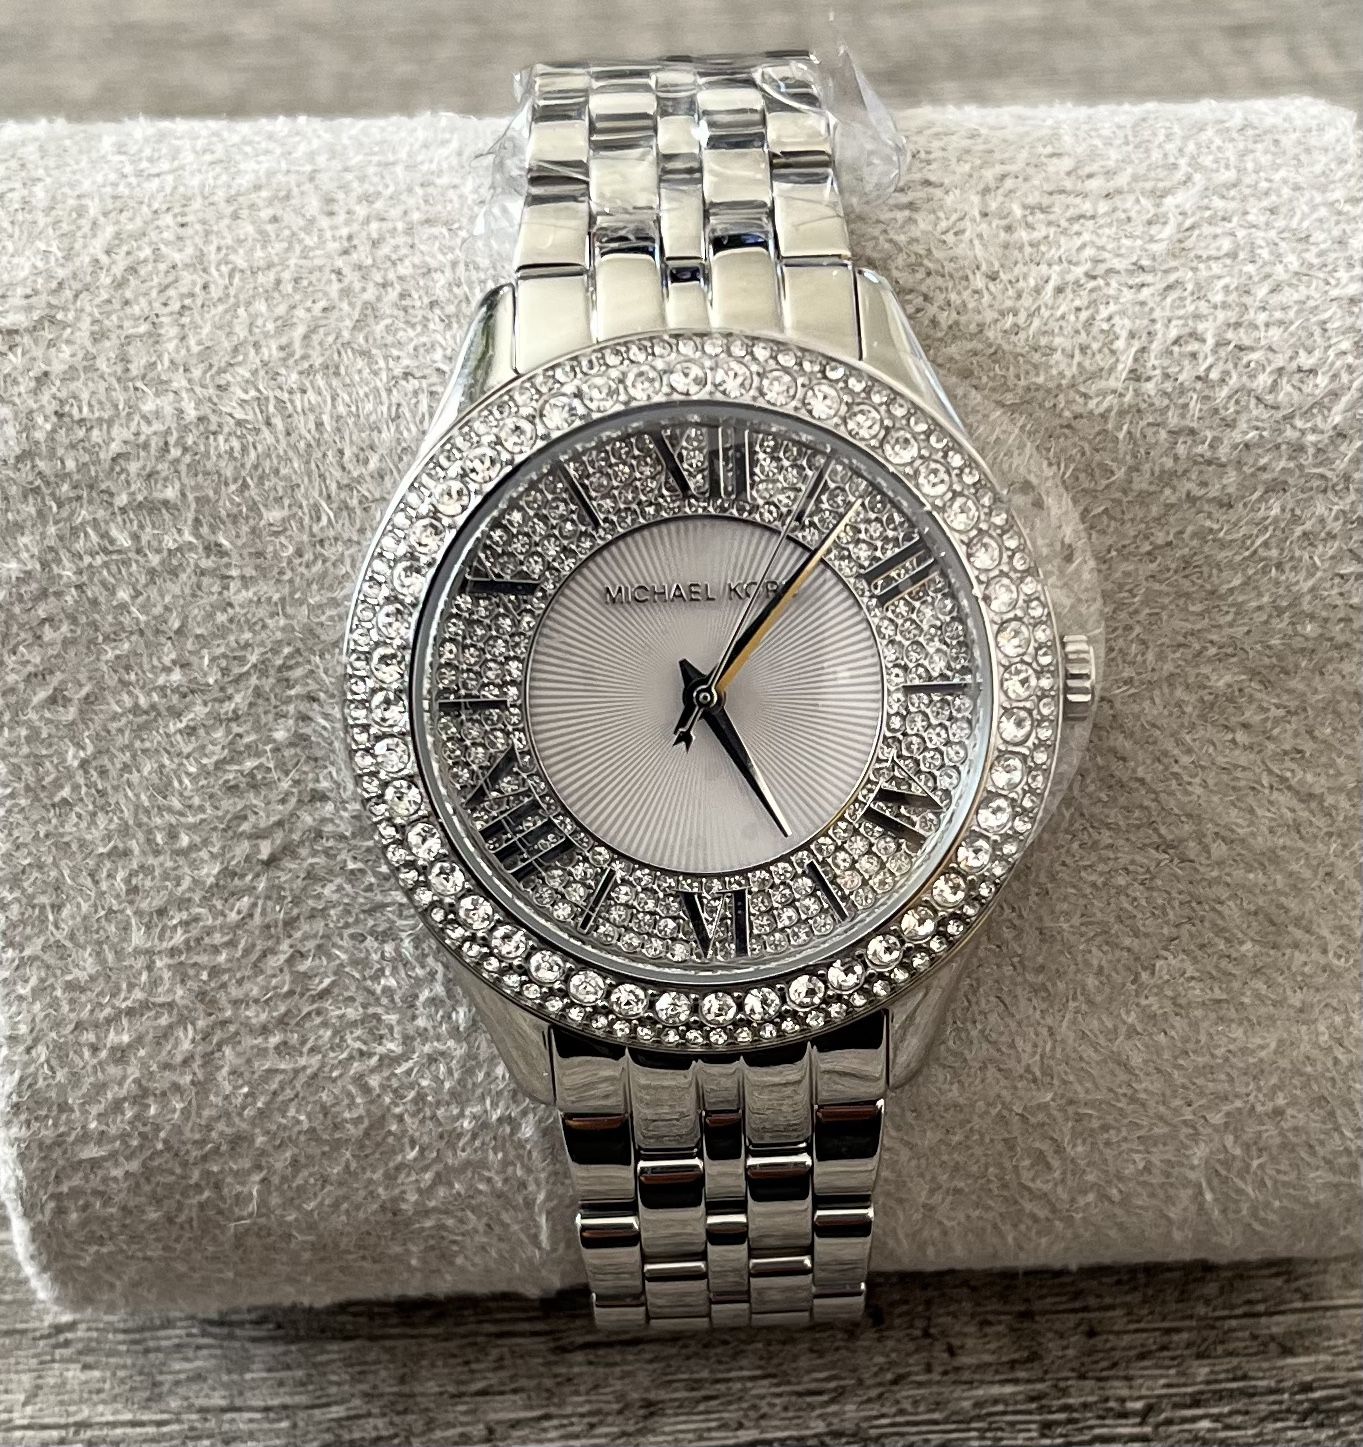 Michael Kors Ladies Watch With Swarovski Crystals Beautiful Watch Brand New In The Box. Retail Is $275